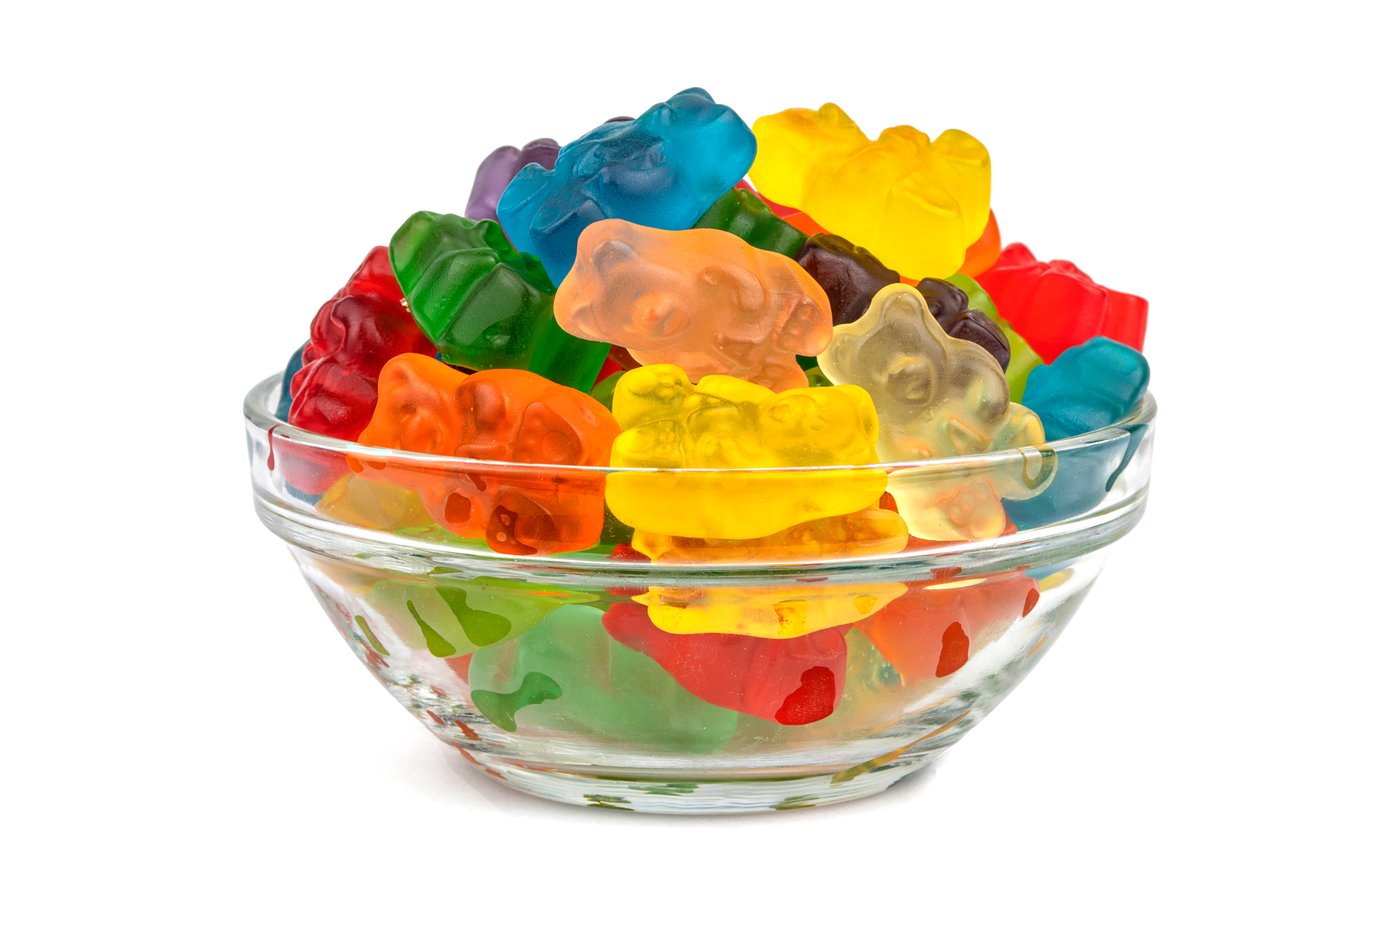 Gummy Bears (12 Flavors) - By the Pound - Nuts.com